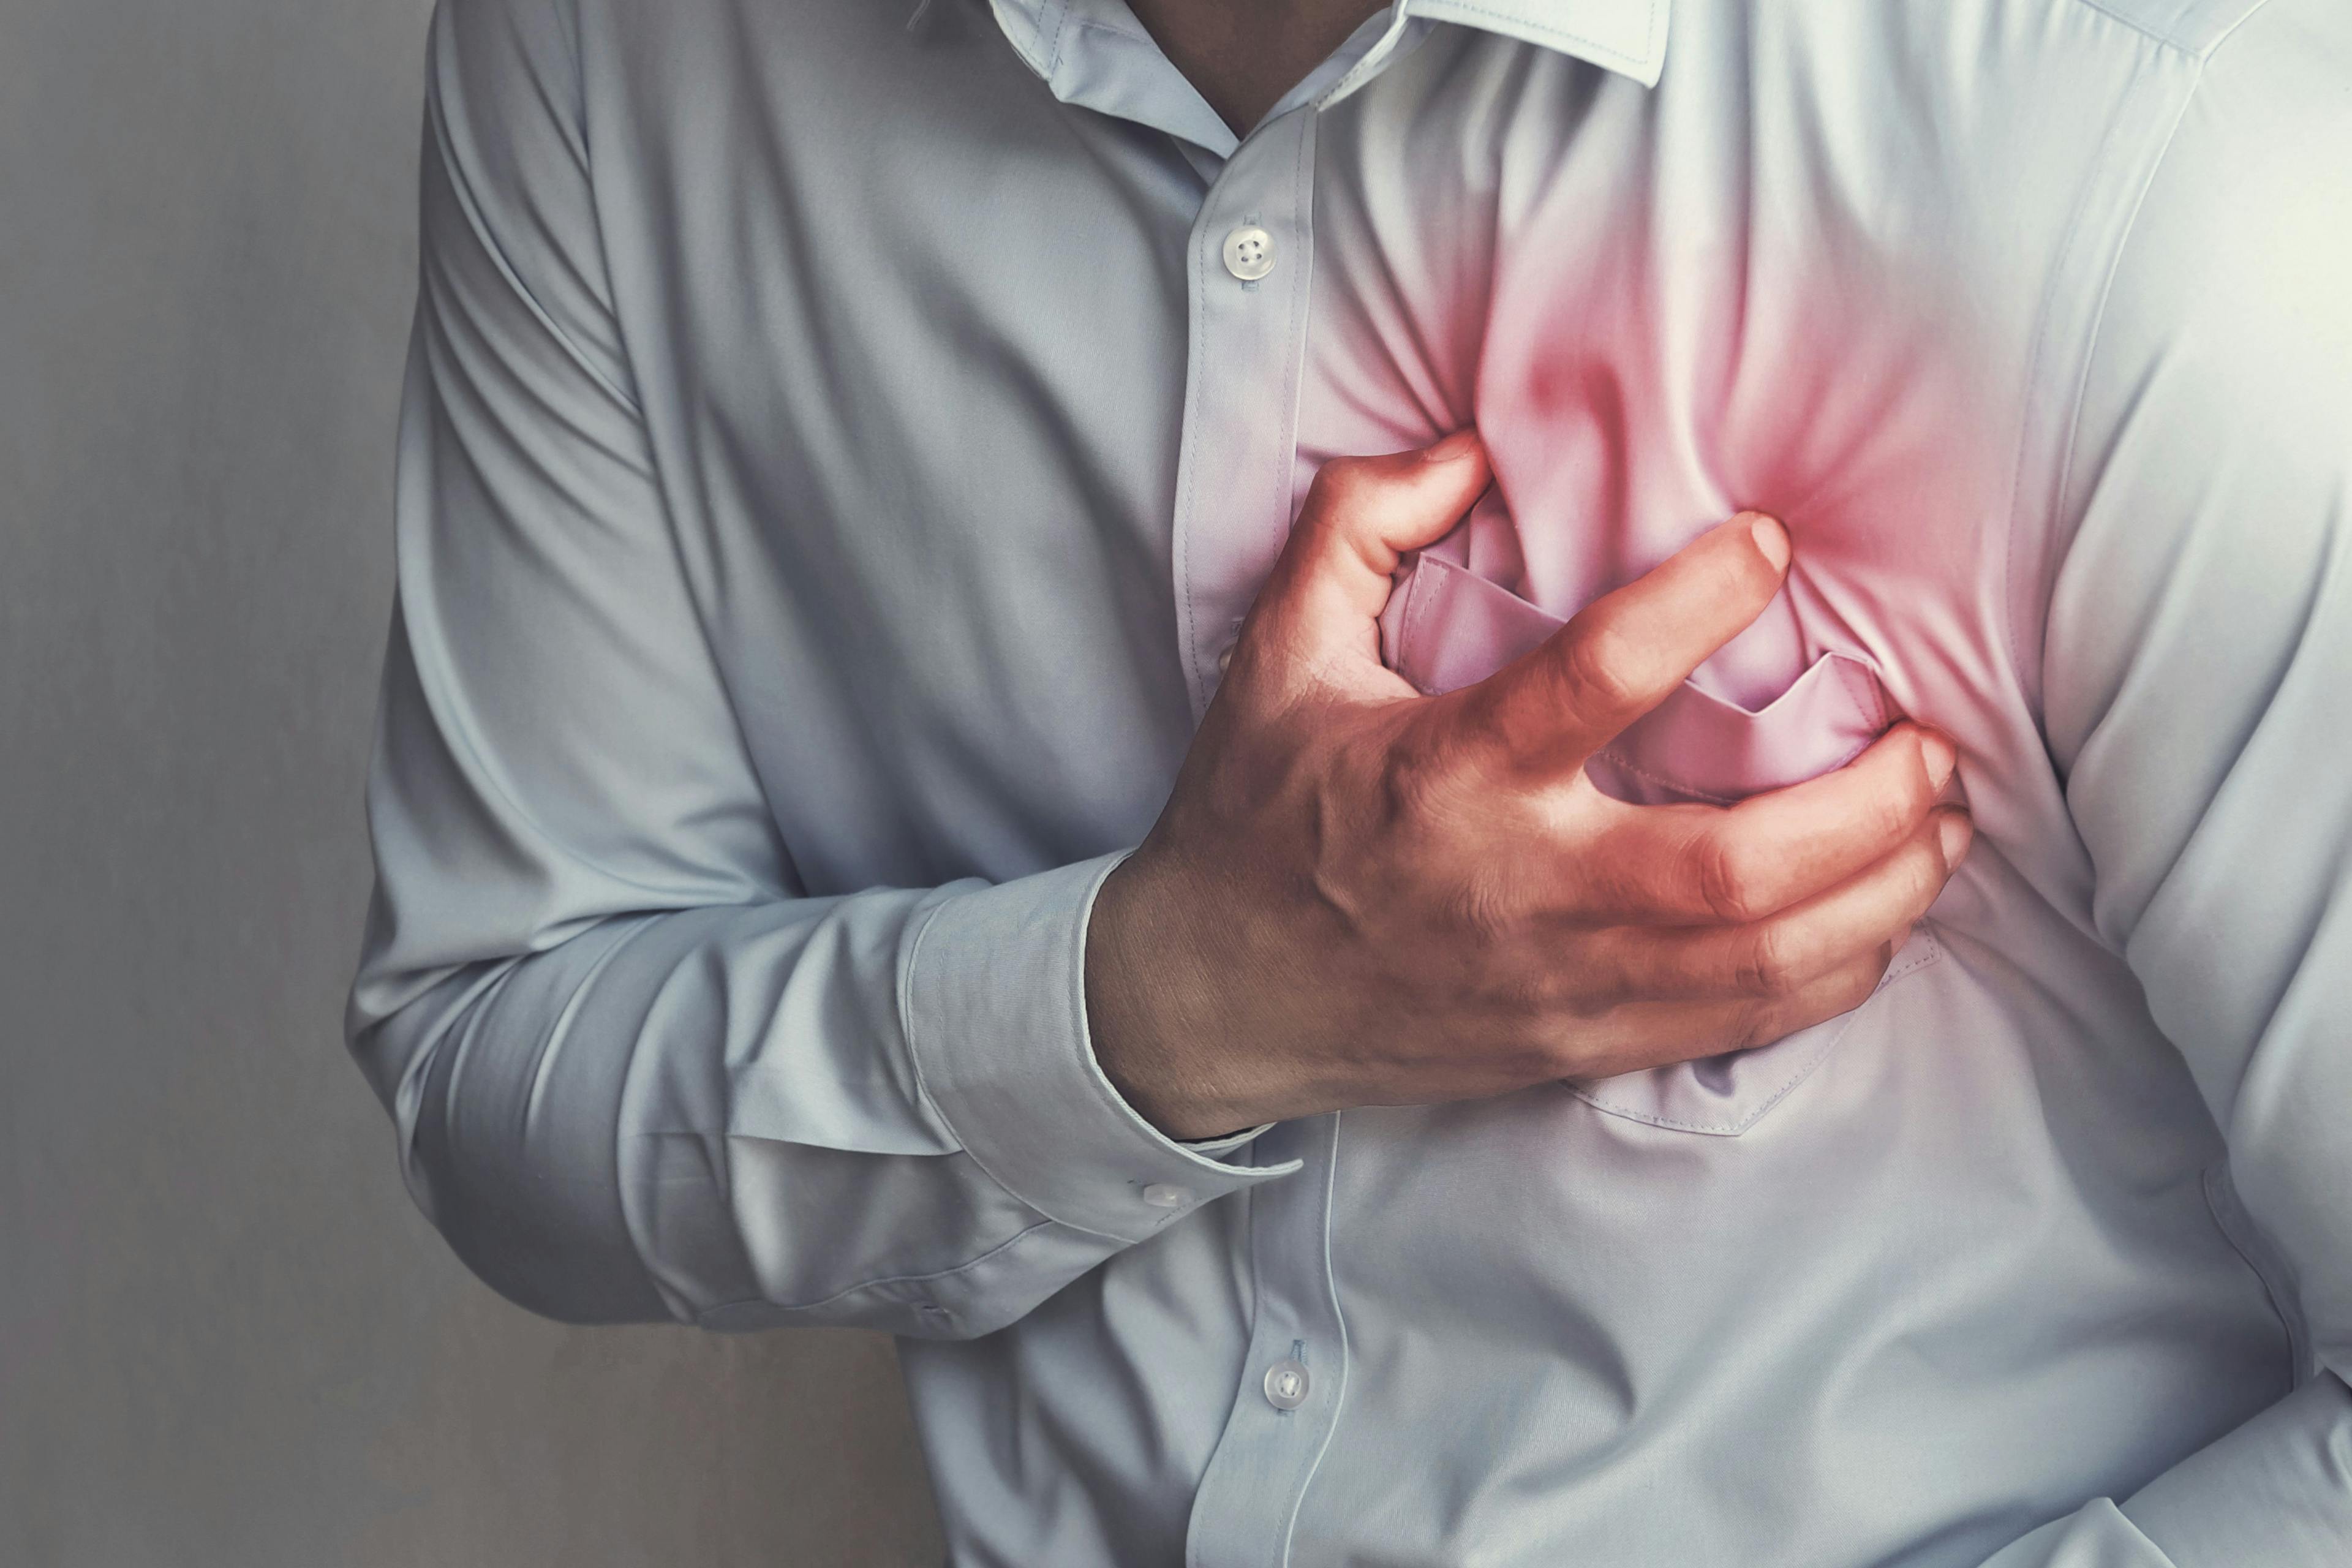 Man experiencing heart failure | Image credit: lovelyday12 – stock.adobe.com